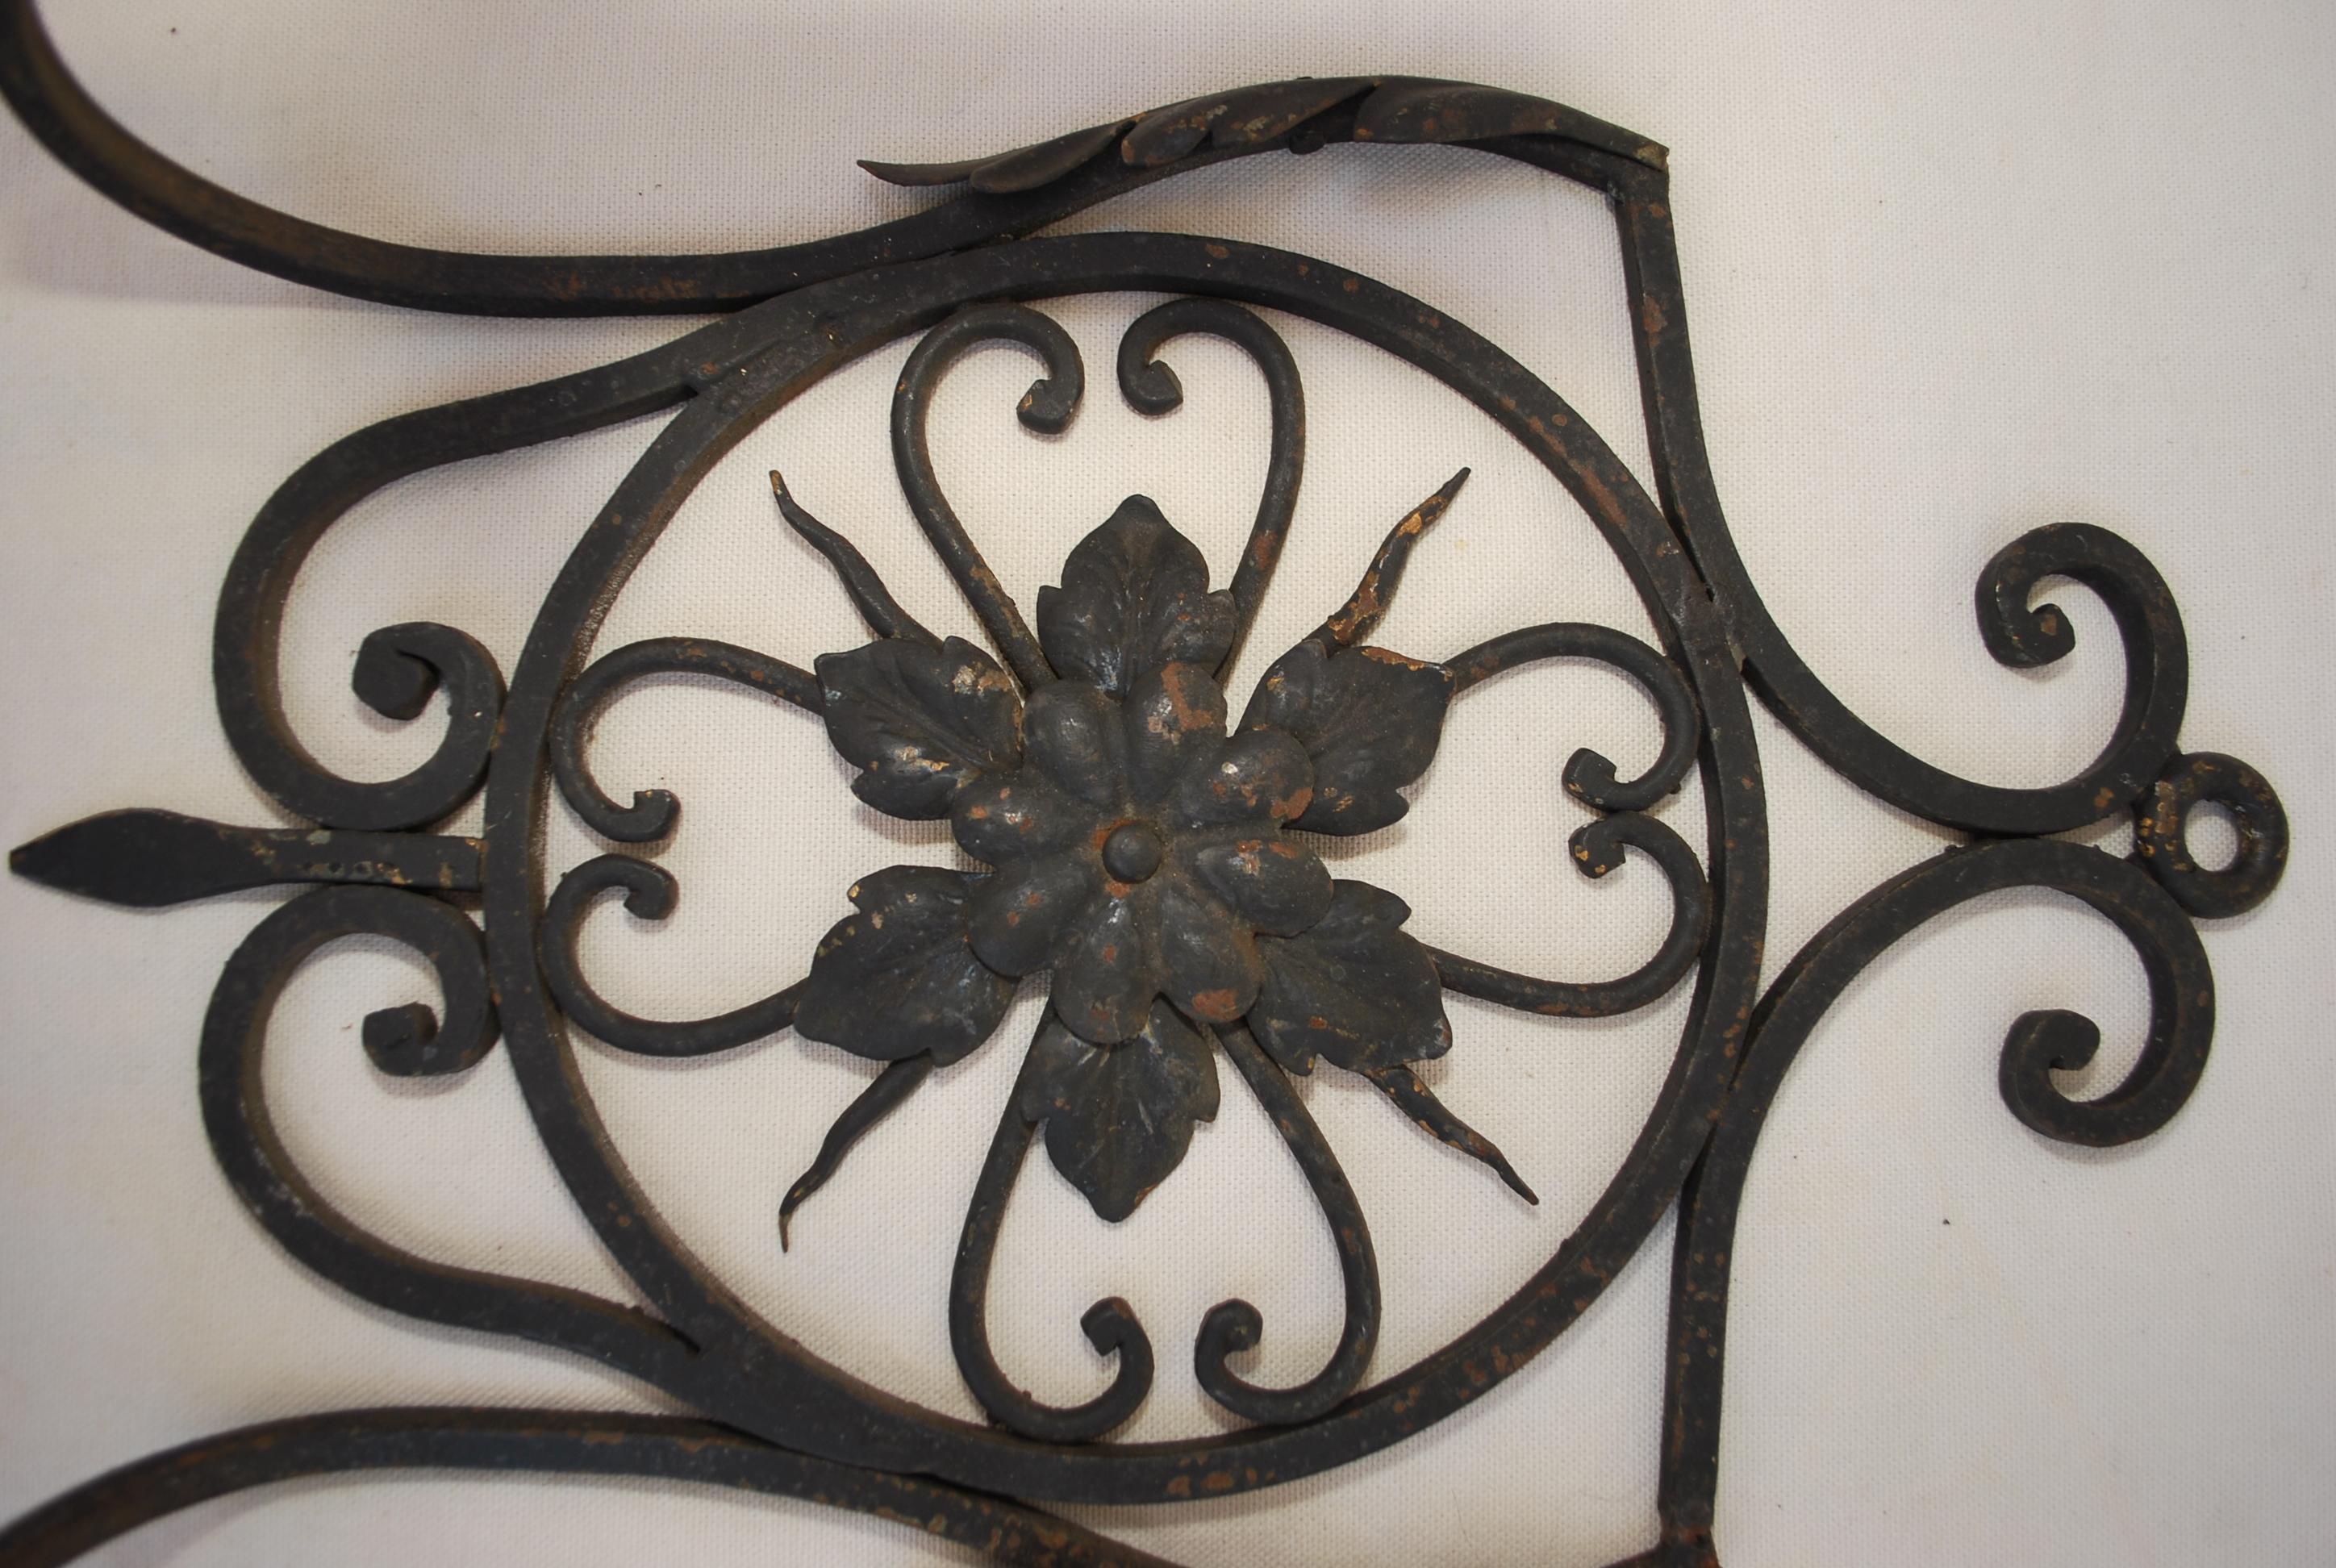 An elegant pair of French hands-forged wrought iron sconces, the patina is allot nicer in person.